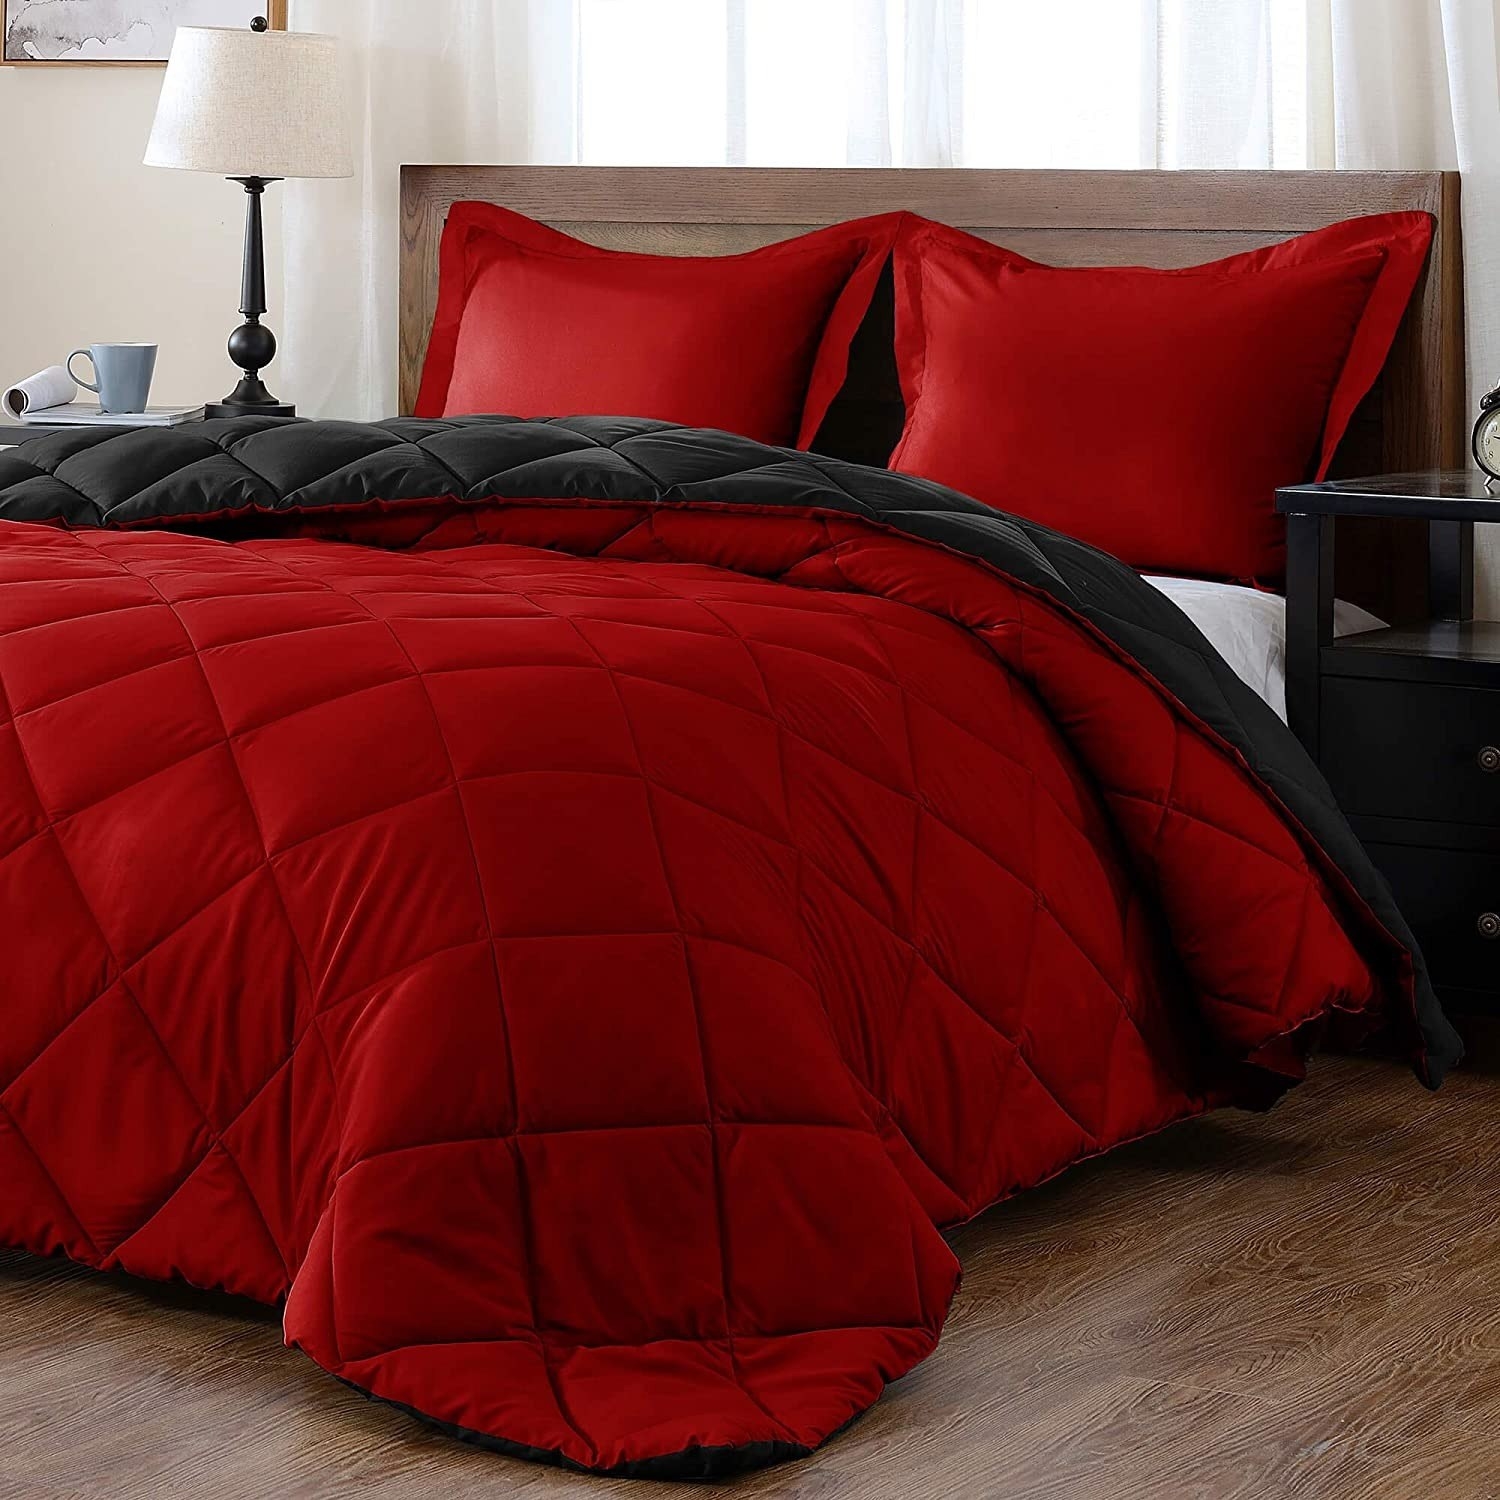 the red reversible comforter on a bed